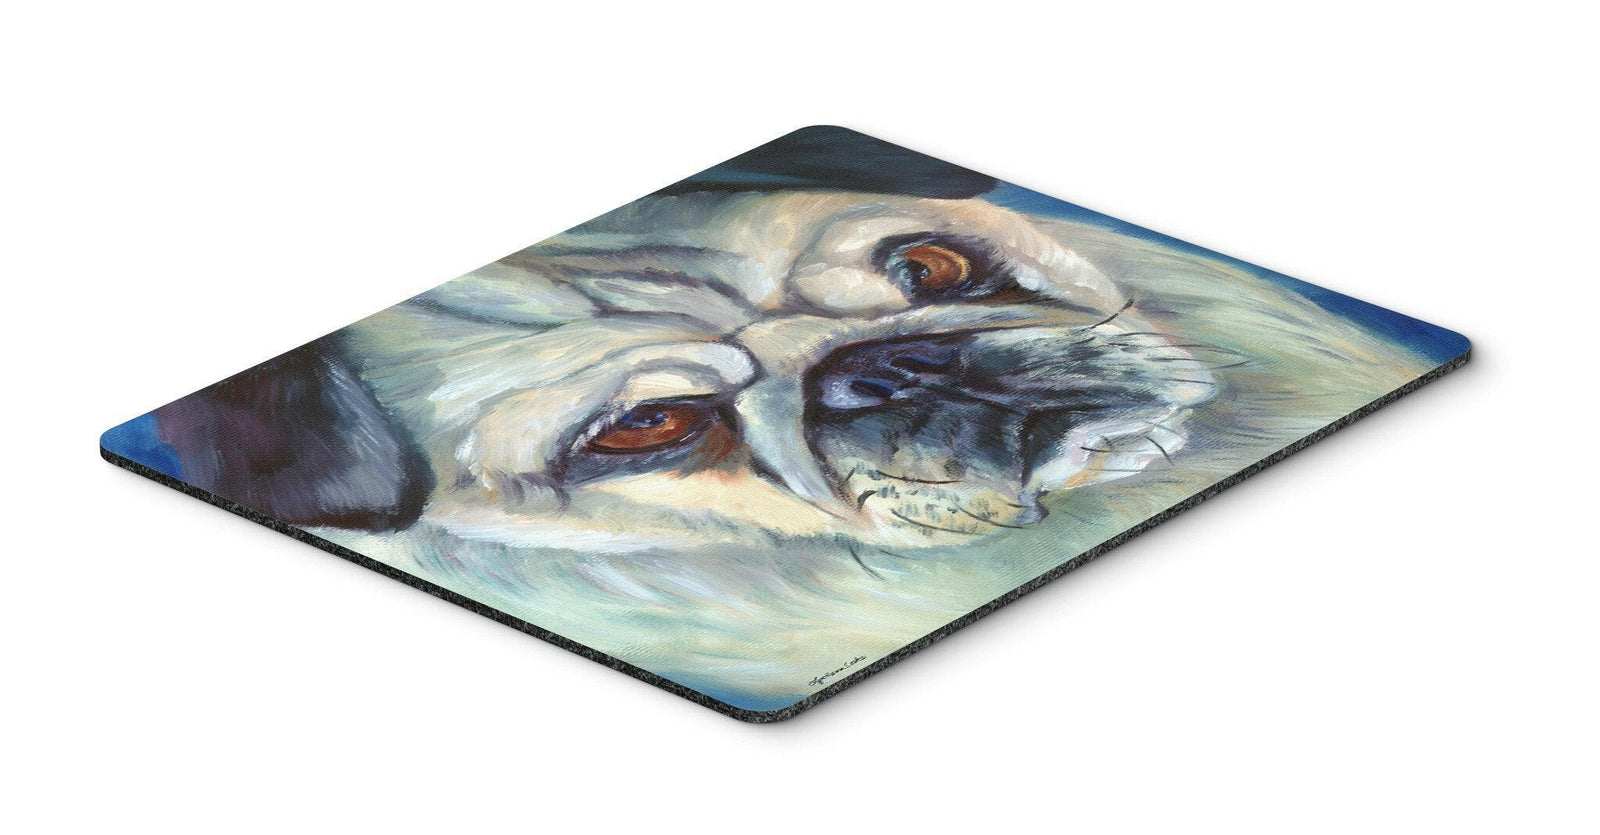 Pug in Thought Mouse Pad, Hot Pad or Trivet 7422MP by Caroline's Treasures